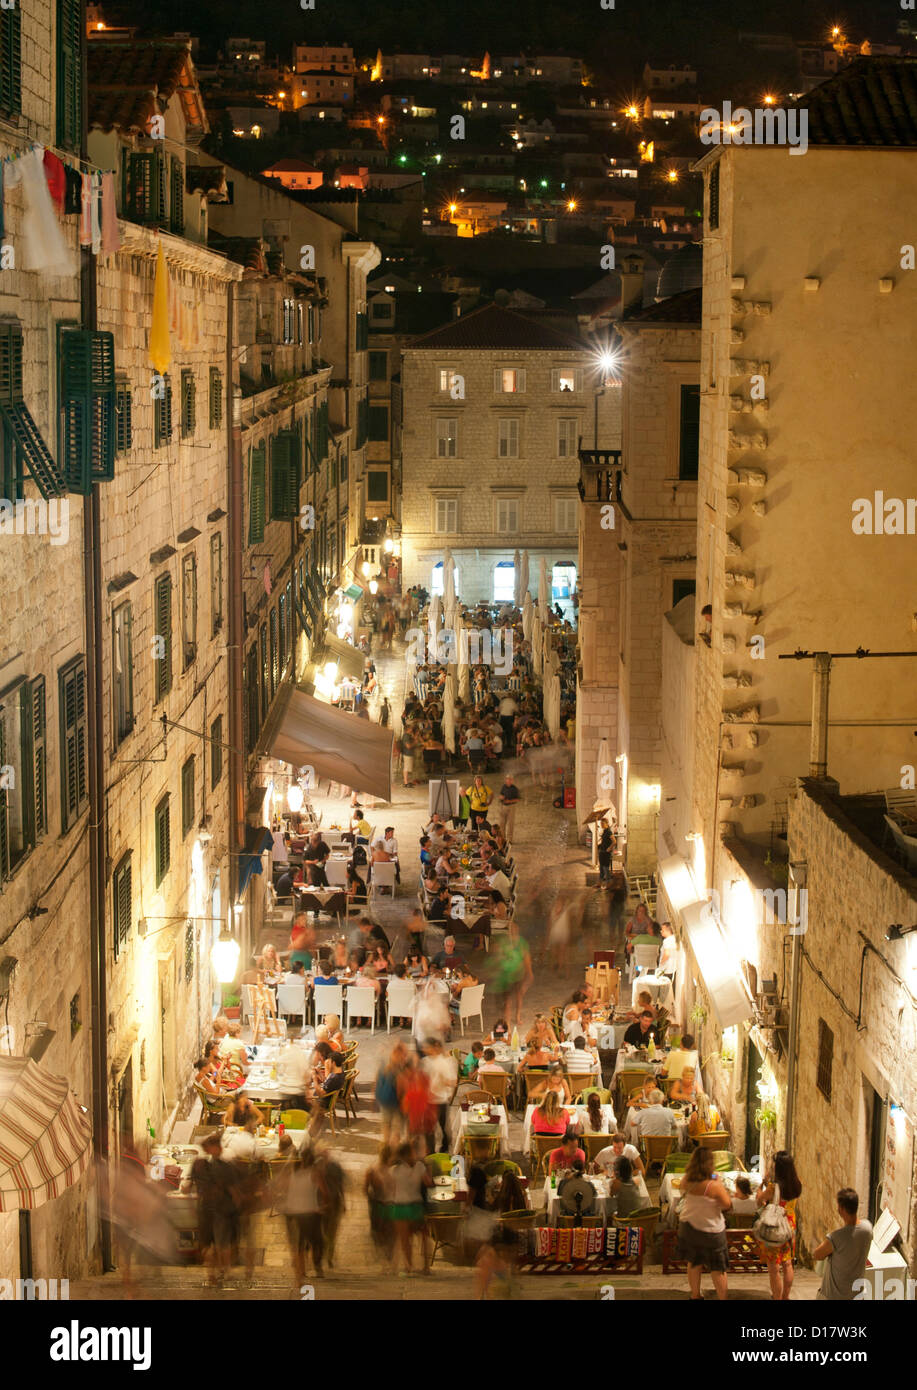 Crowded restaurants on Uz Jezuite street in the old town in Dubrovnik on the Adriatic coast of Croatia. Stock Photo